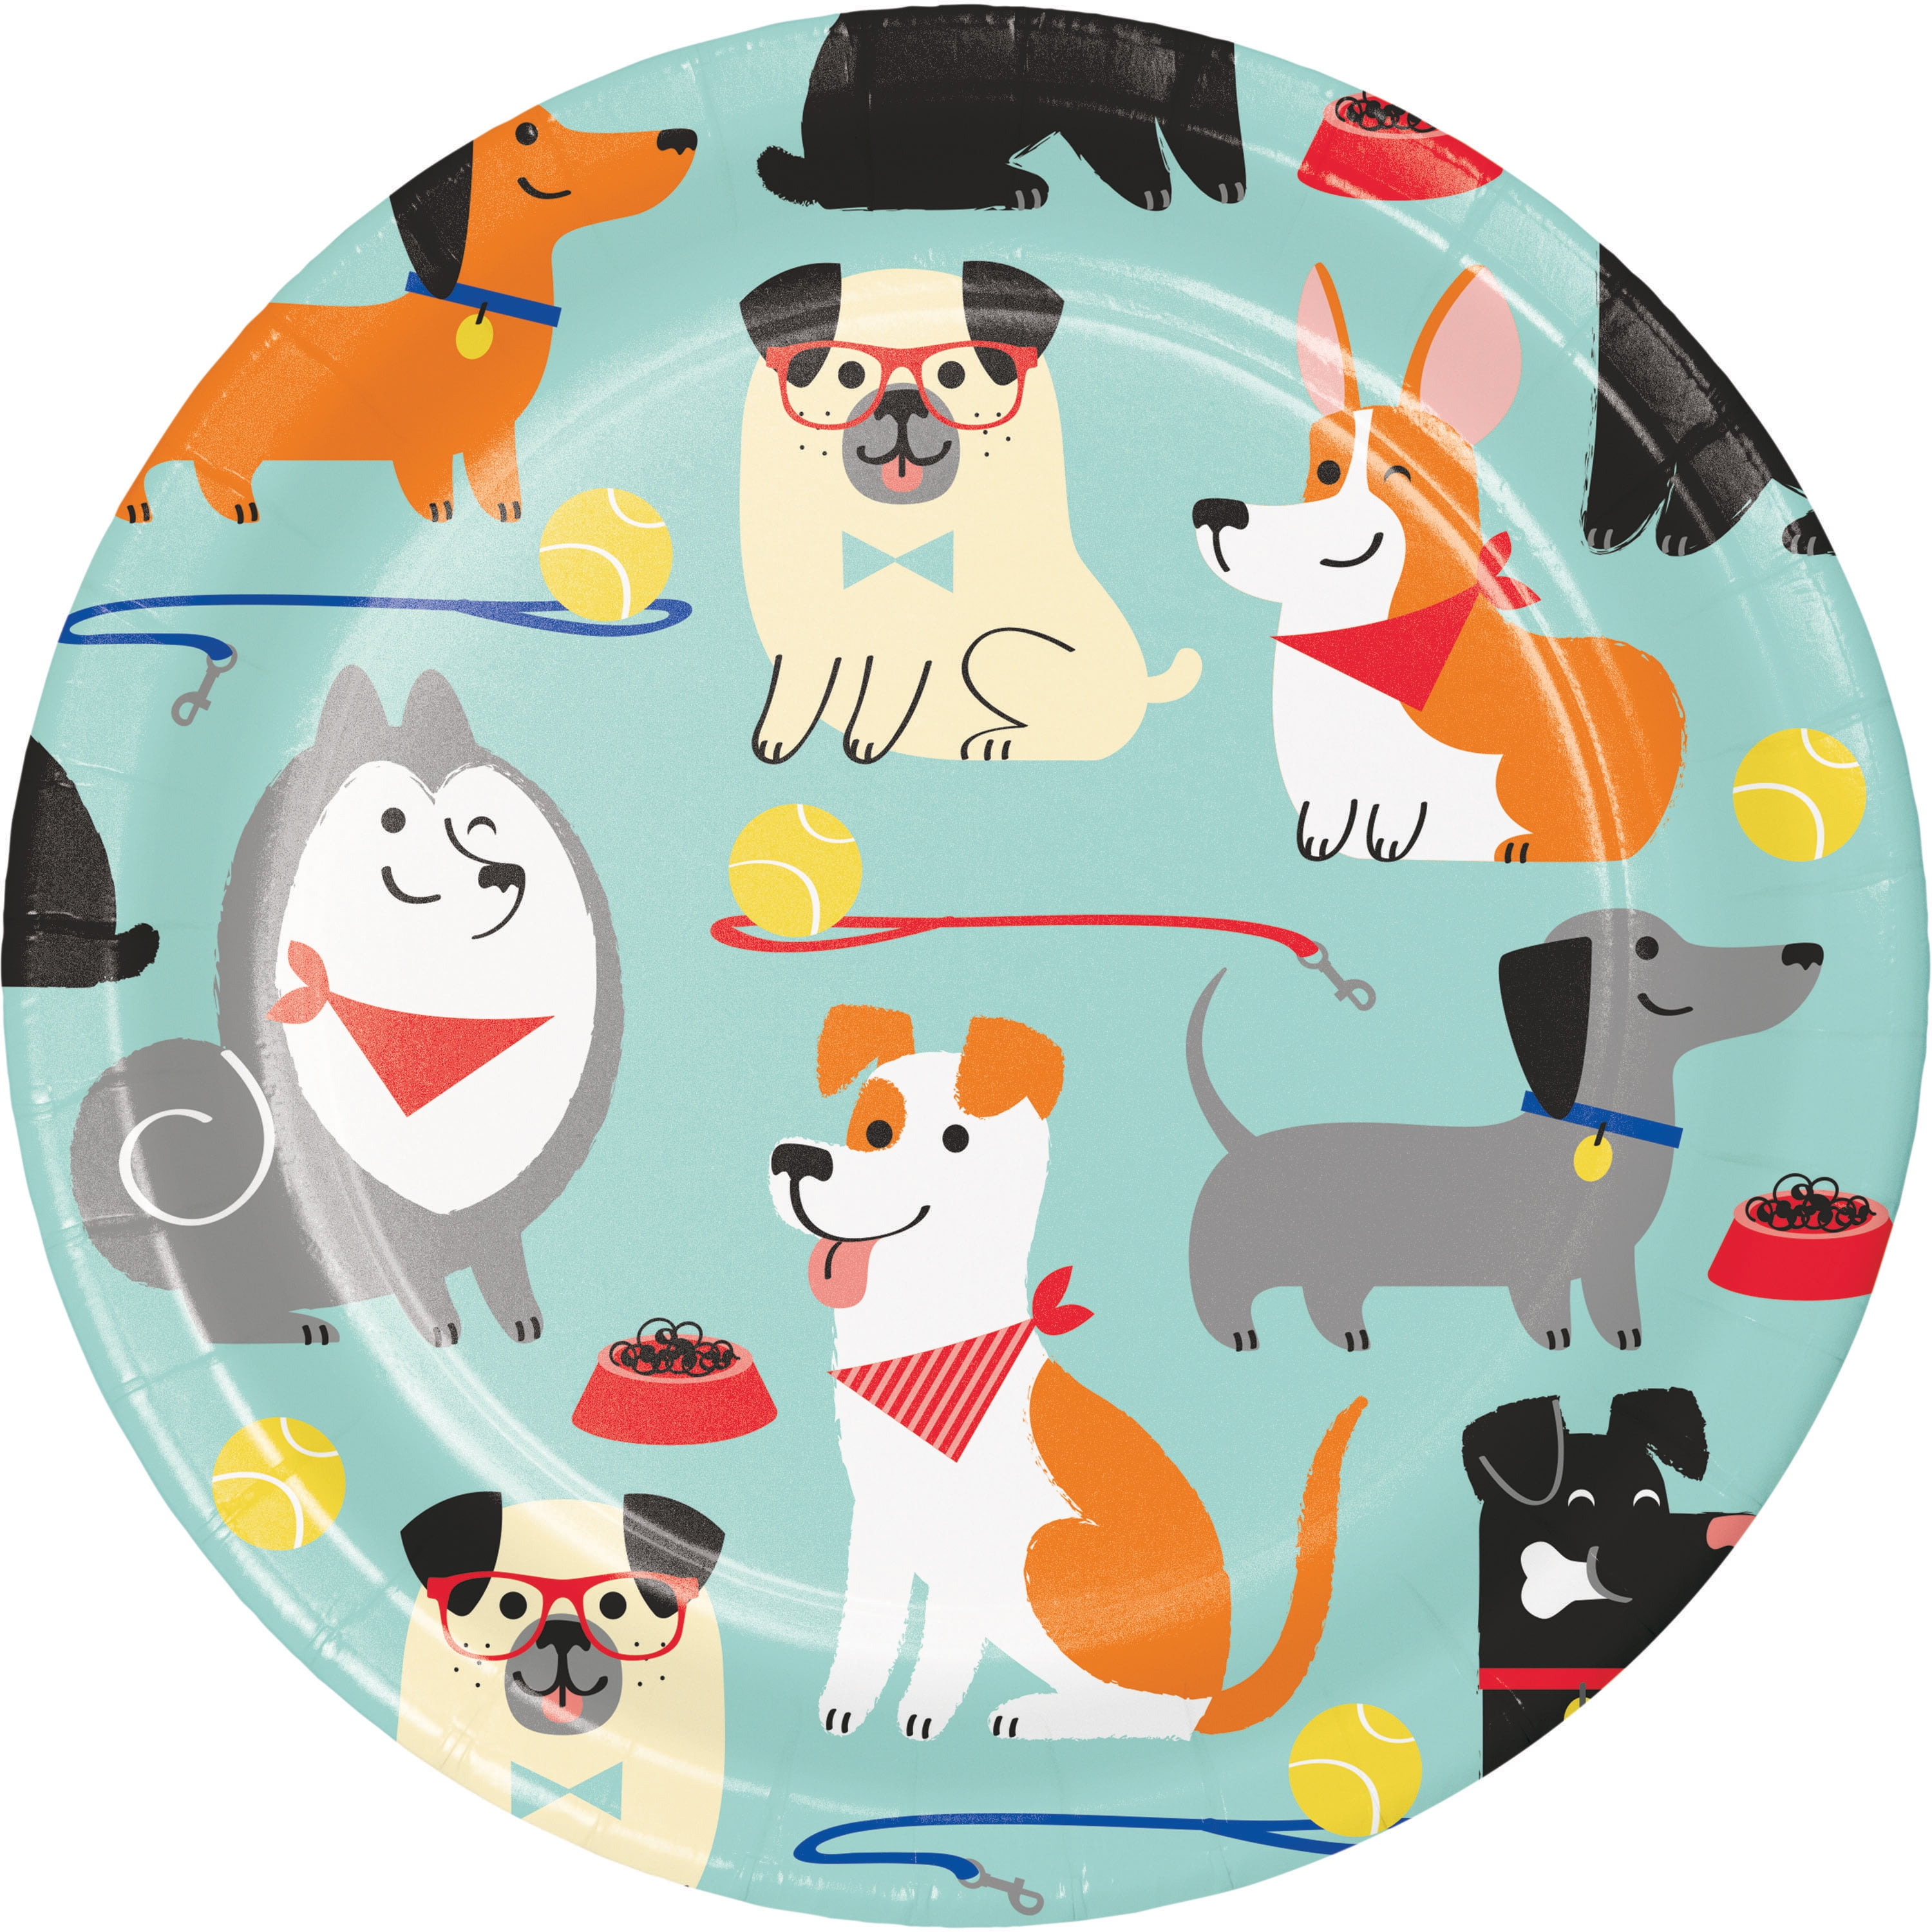 Cartoon Dogs Birthday Party Supplies Decorations 9 Inch and 7 Inch 24 Blue Dog Party Plates Birthday Disposable Plate